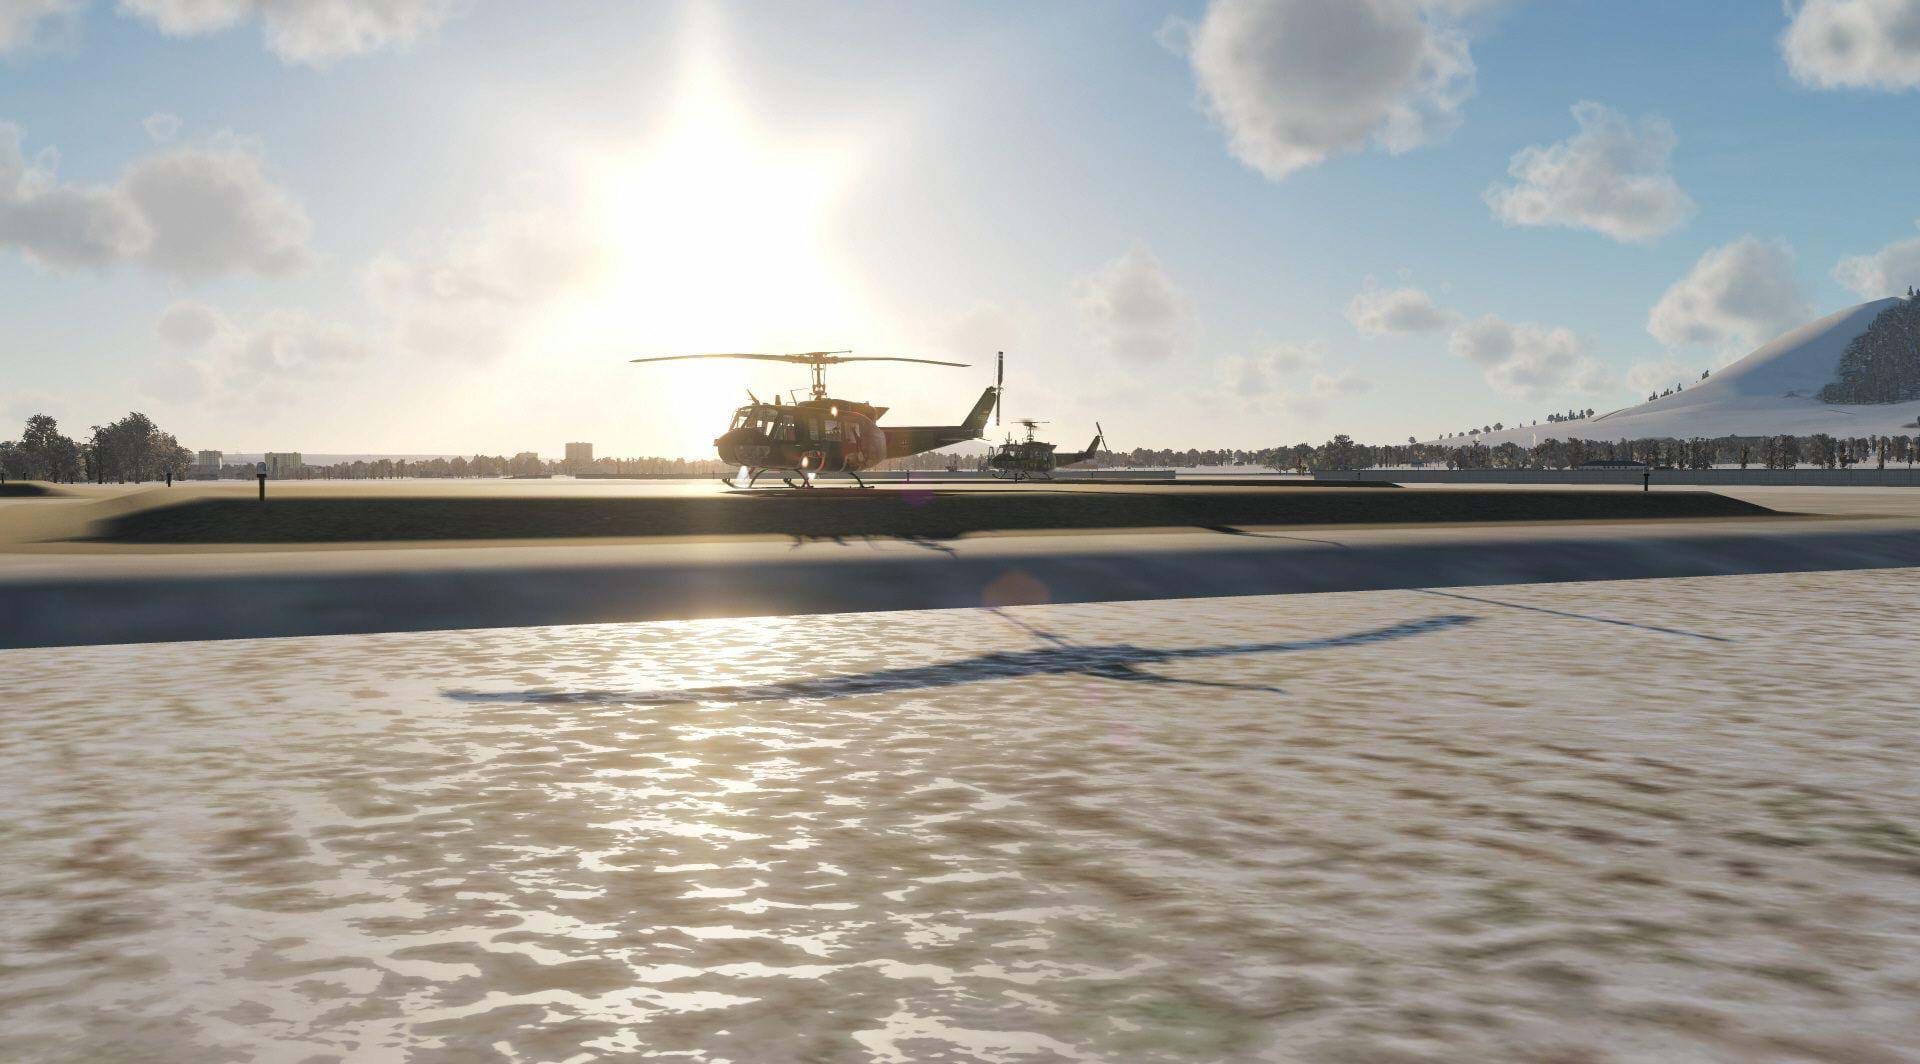 Snow Desert Mission 1 for DCS is out